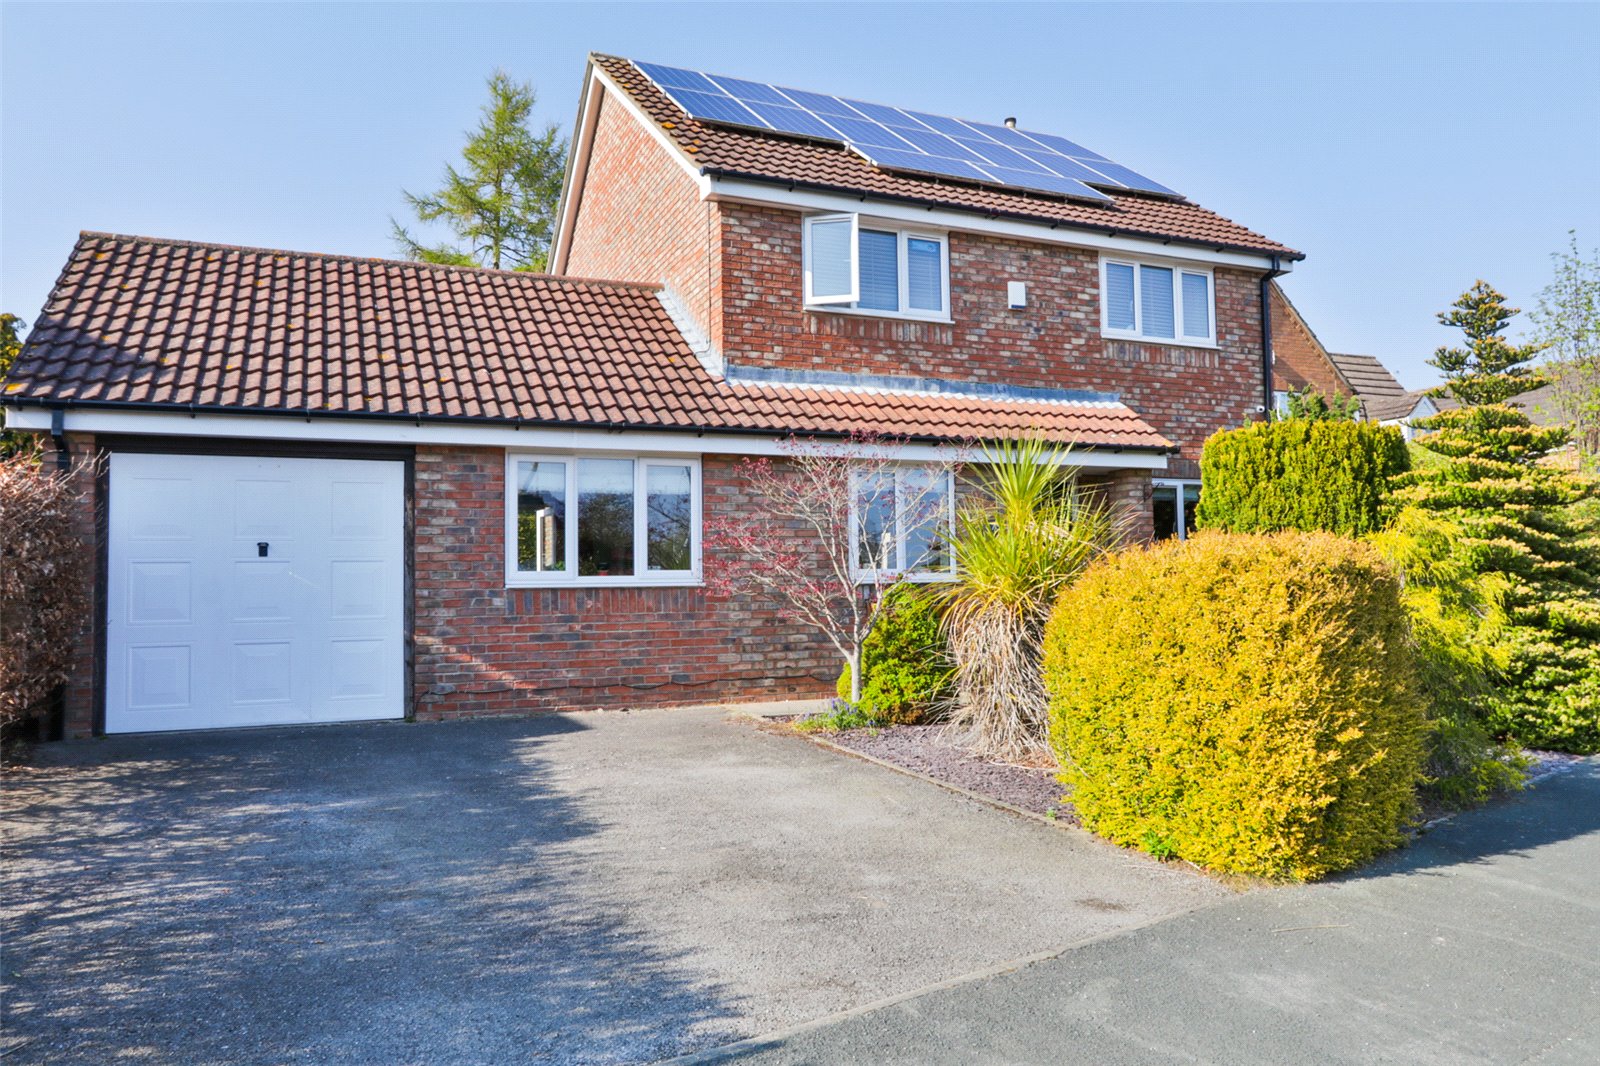 4 bed house for sale in Churchfields, Tickton 0